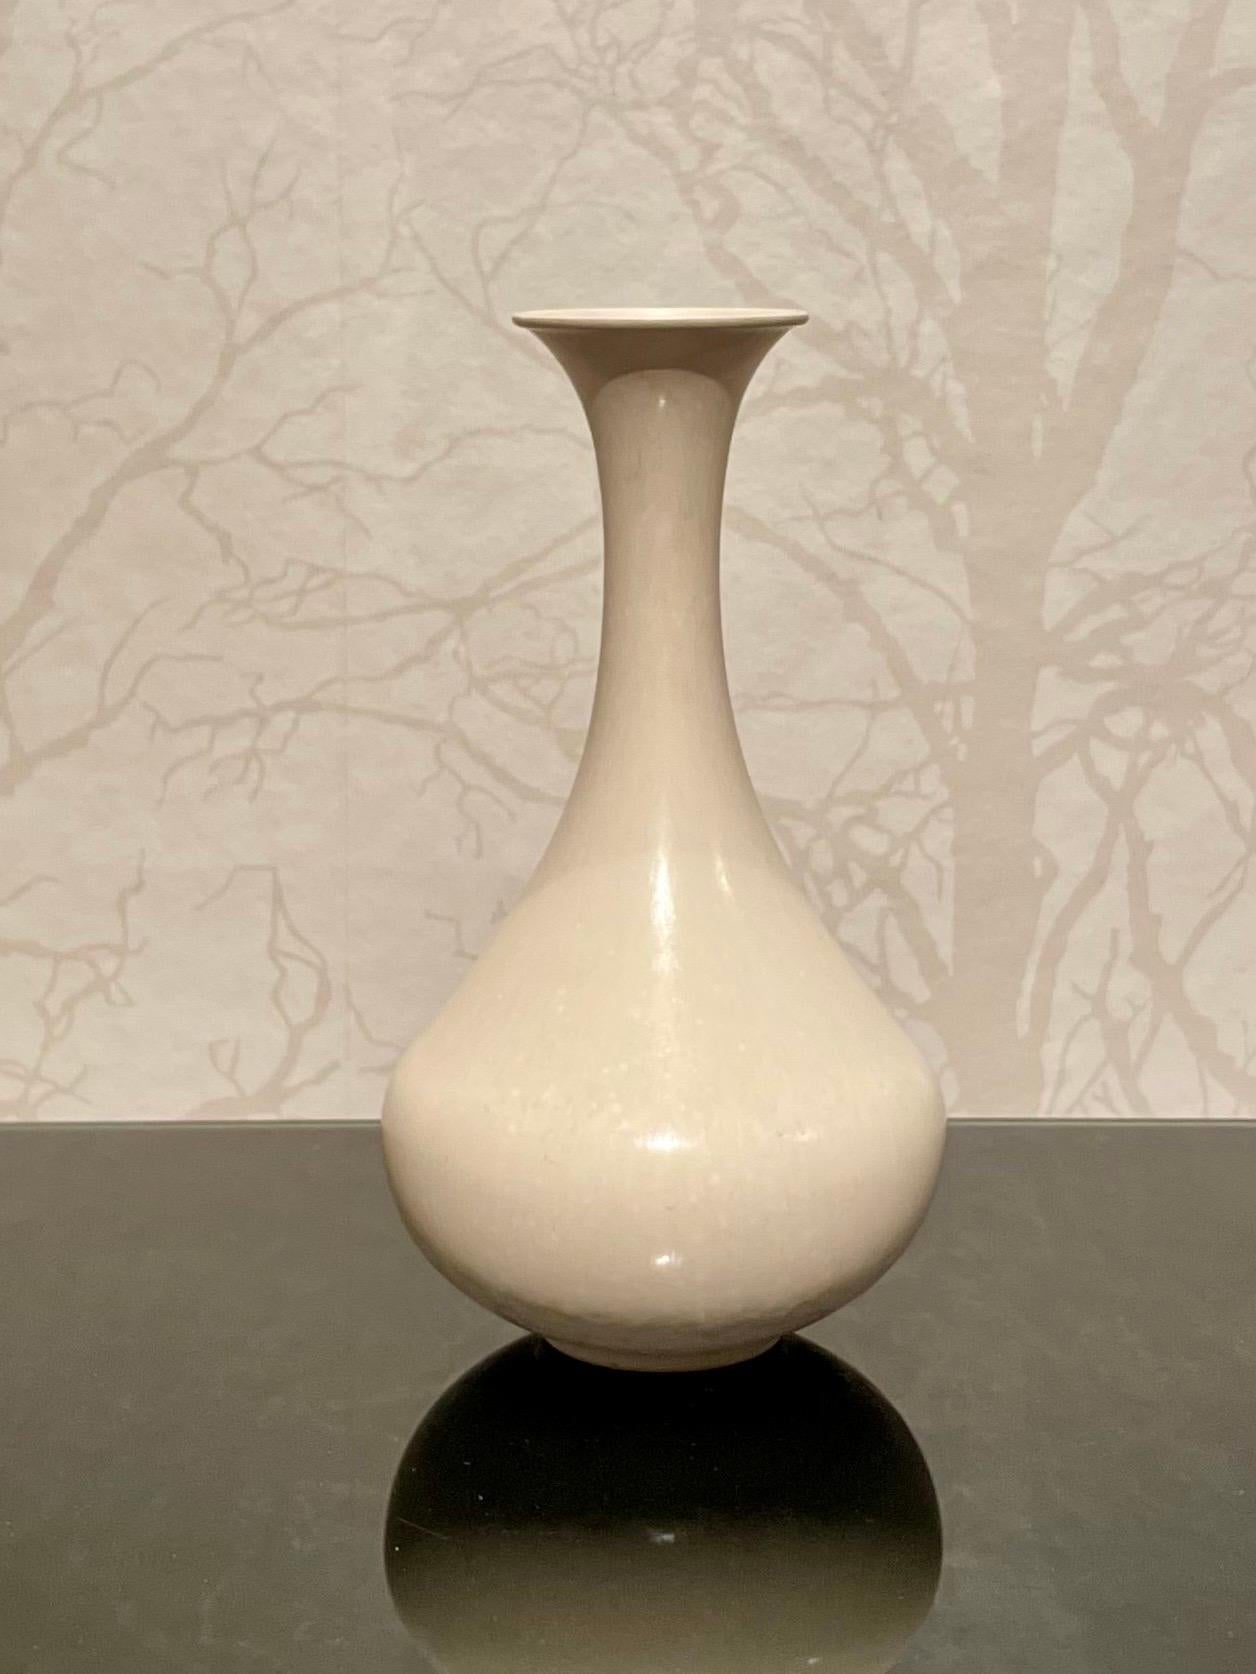 This is the 1960s eggshell glazed ceramic vase in white by Gunnar Nylund for Rörstrand. 
It comes in a female elegant form and sober white eggshell glazed silky matte surface. 
The vase's balustraded shape ends upwards with a tall tapering neck.
The